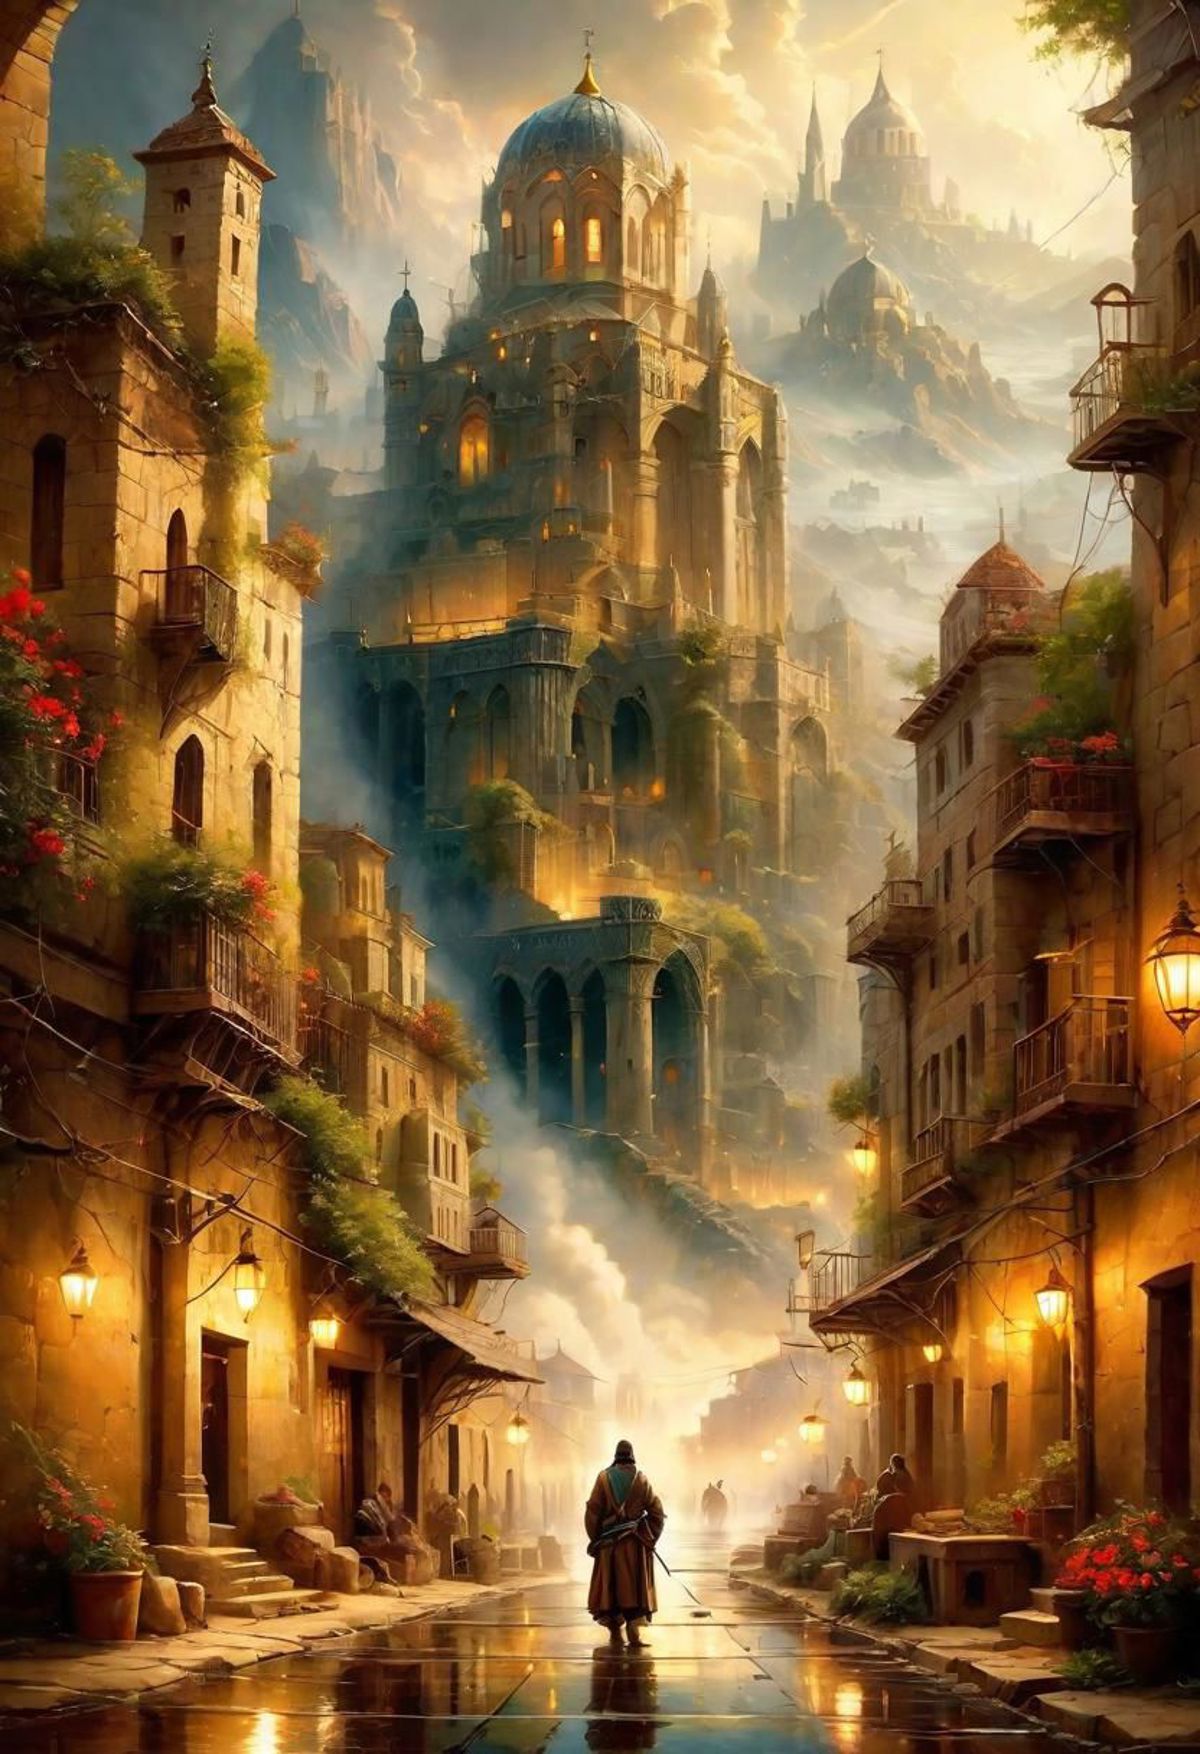 A magical city scene with a majestic castle in the background and people walking down the street.